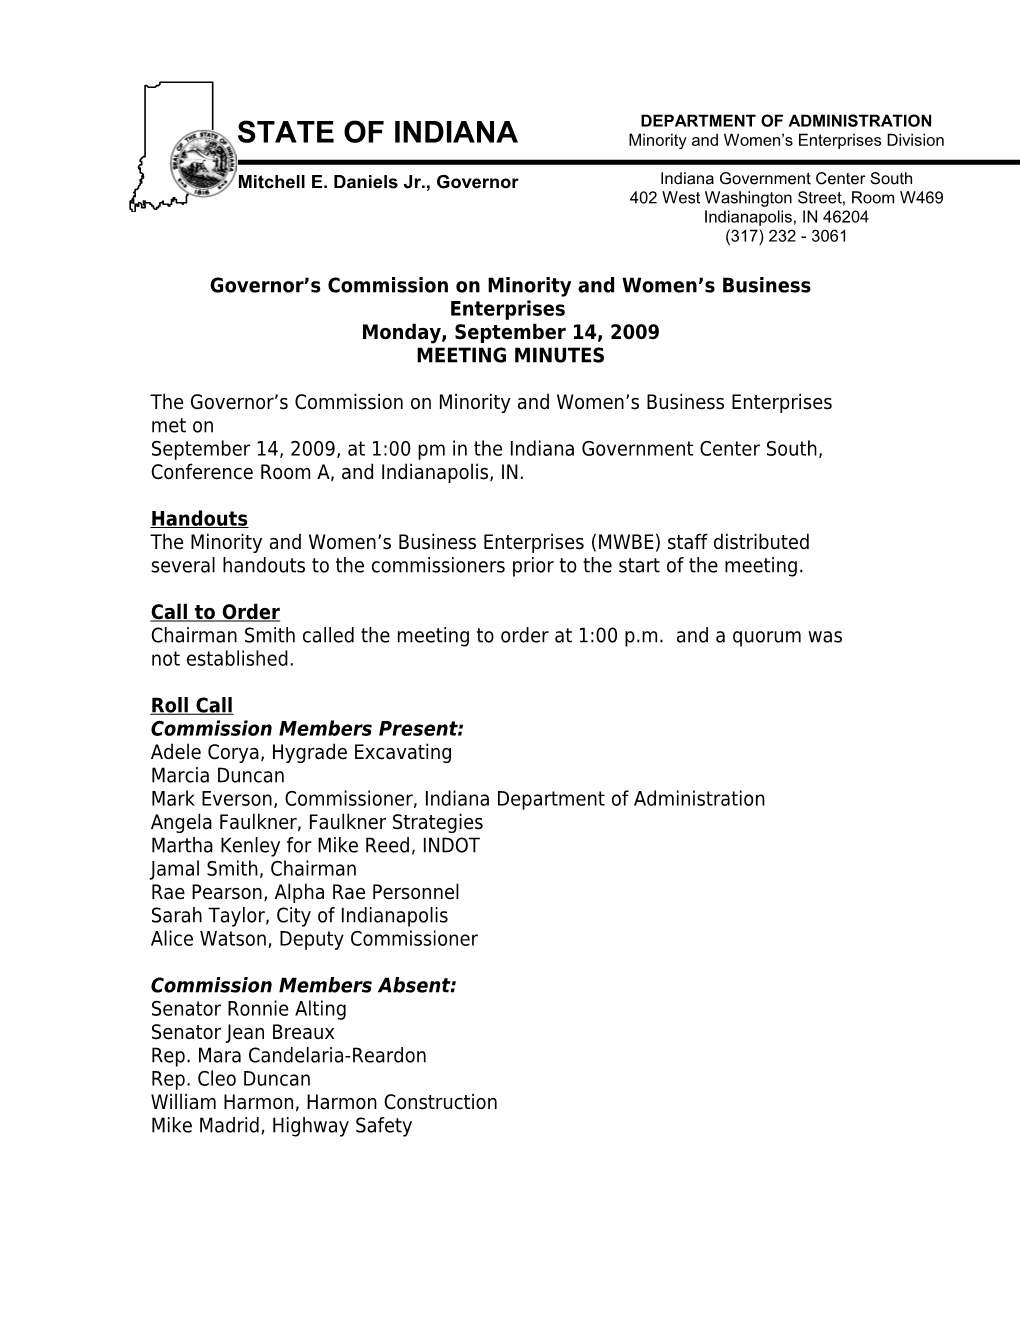 Governor S Commission on Minority and Women S Business Enterprises Monday, September 14, 2009